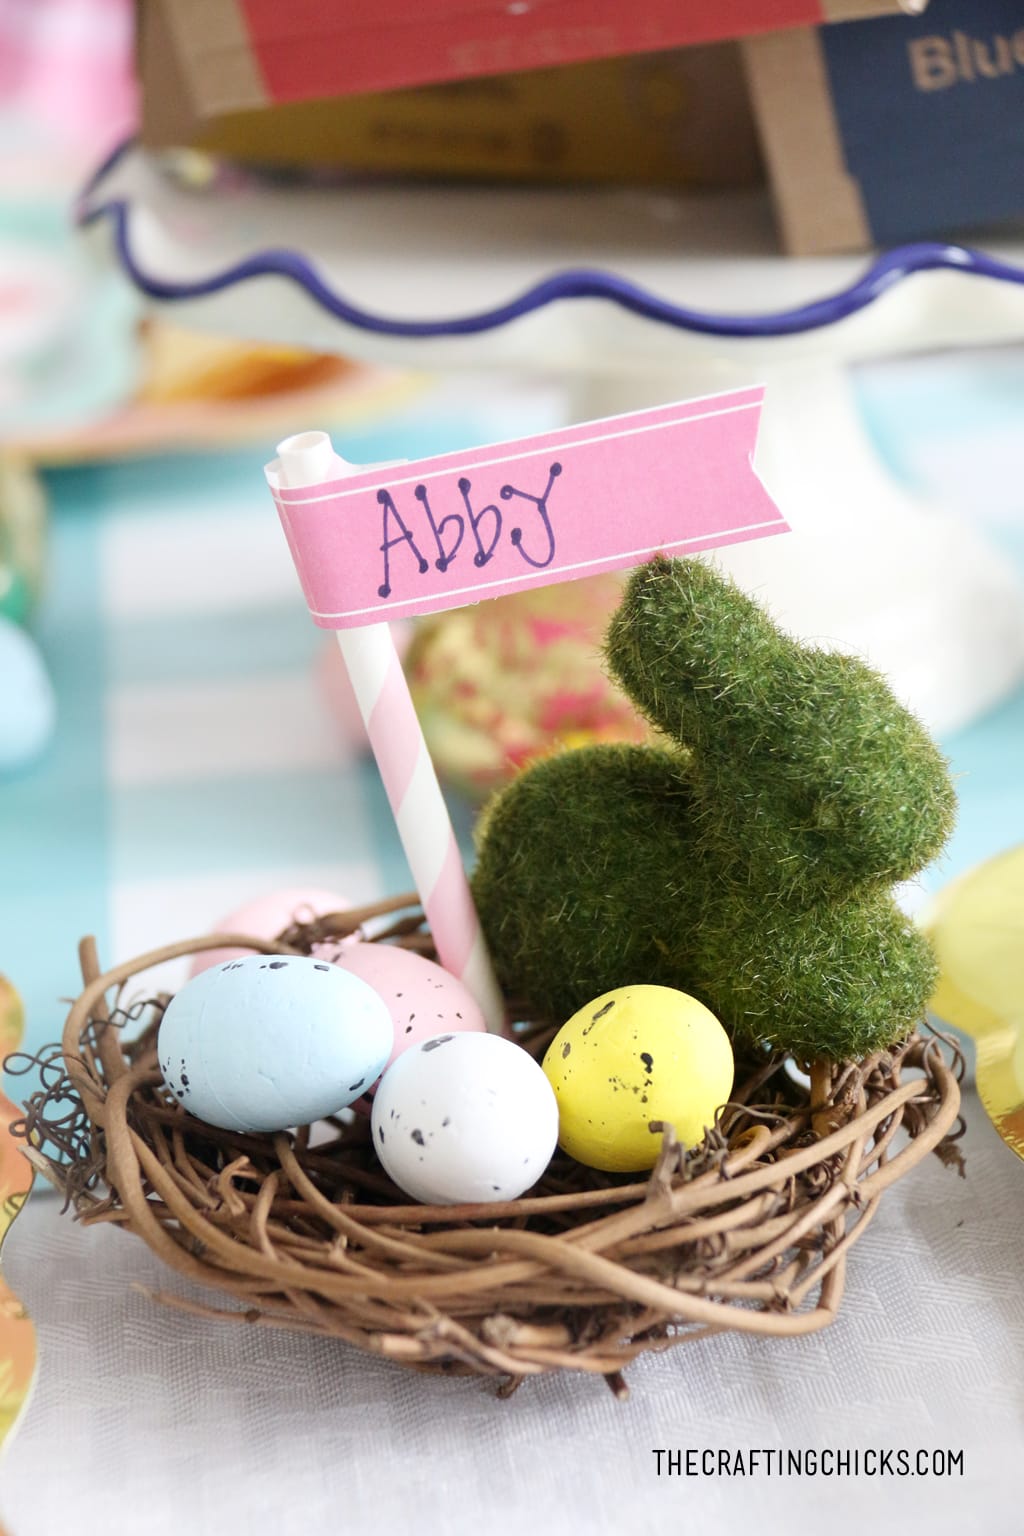 Easter table for kids with faux grass bunny decoration and faux eggs as in a nest with a name tag as table decoration.